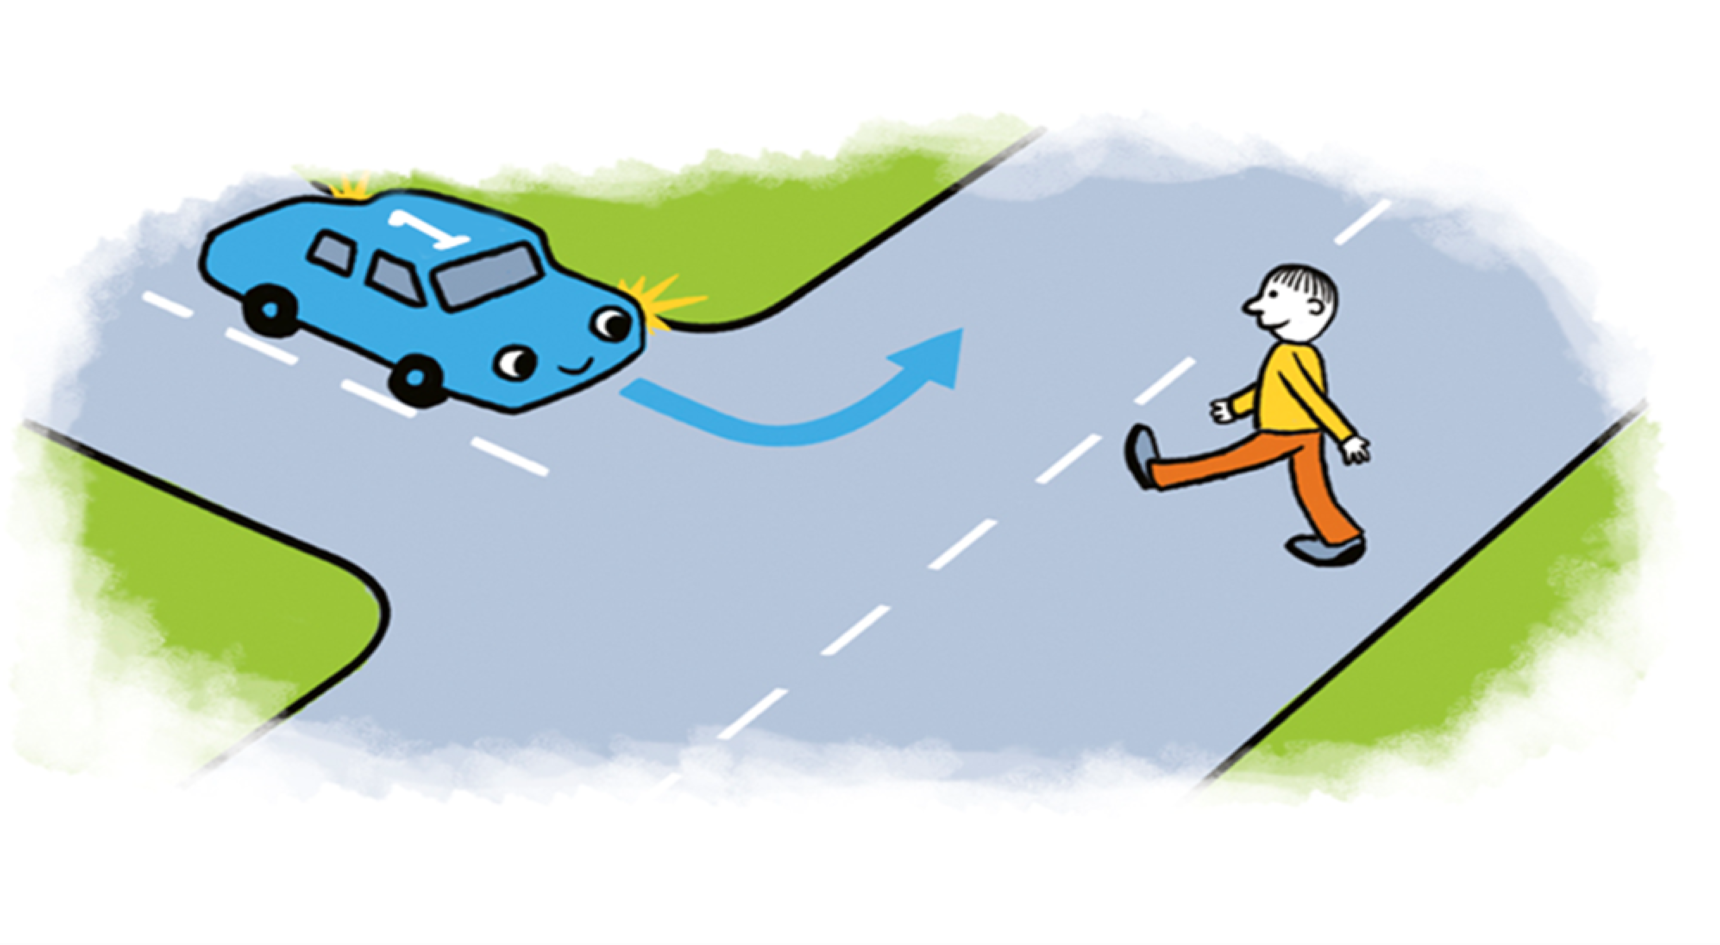 Illustration of pedestrian crossing the road, as blue car attempts to turn left onto the road.